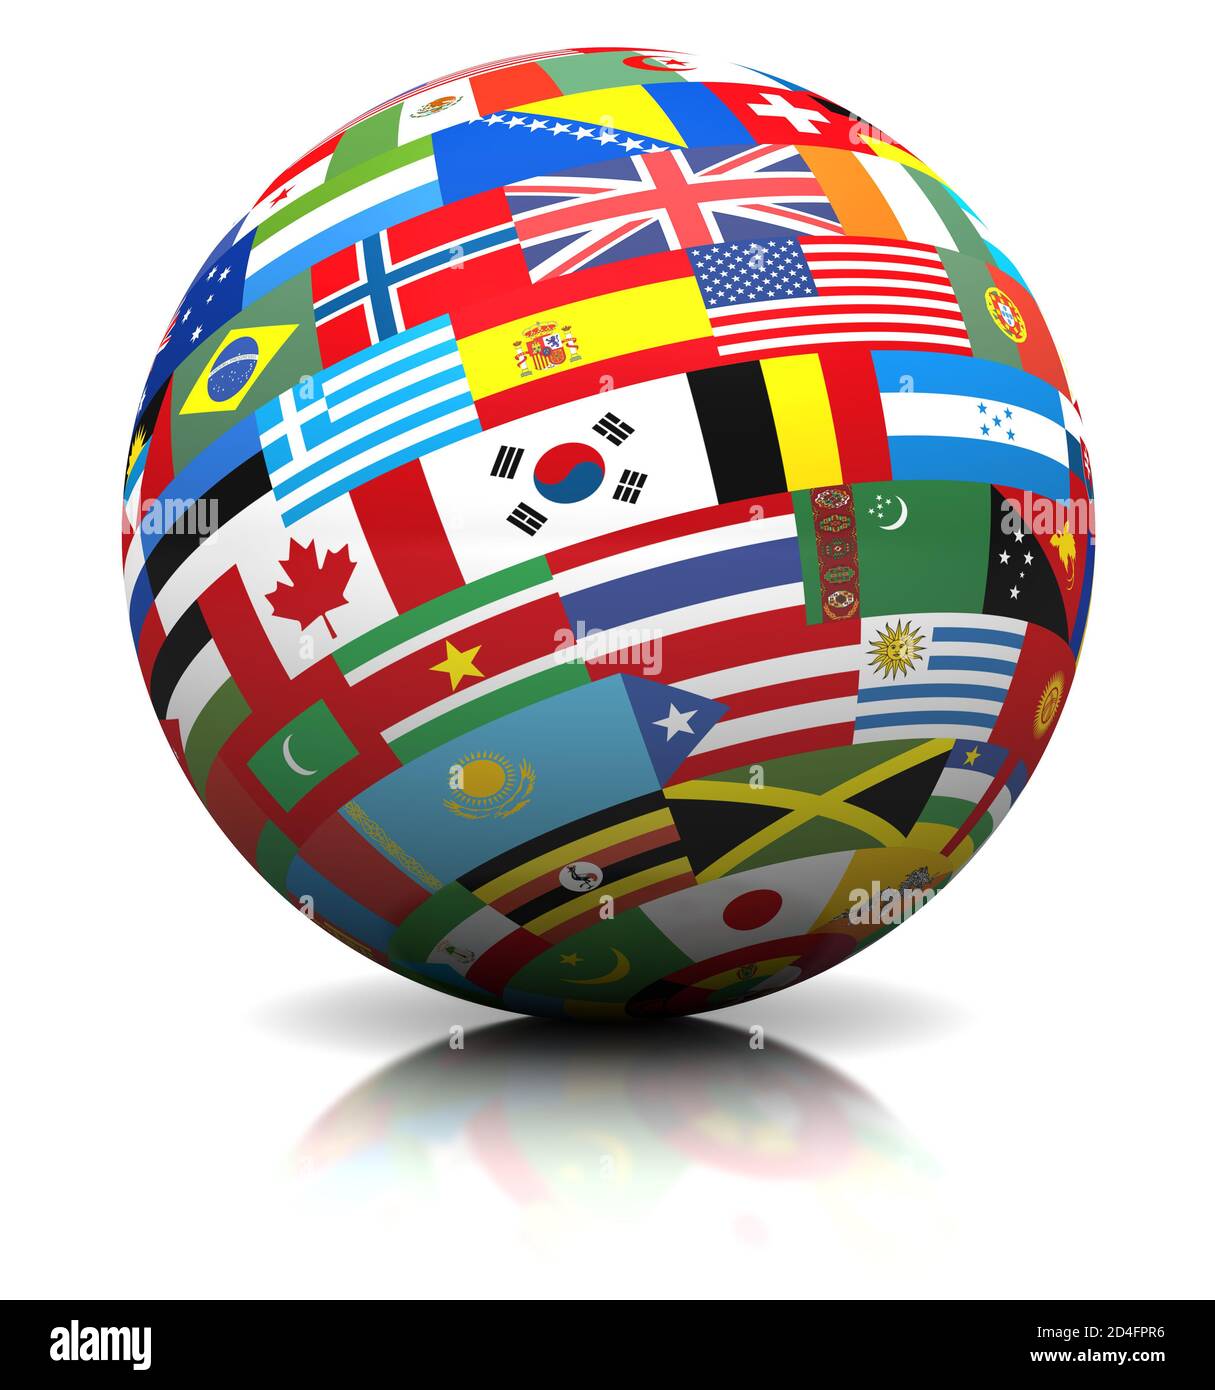 Globe of world flags, international symbols of countries worldwide, white background, cut out Stock Photo